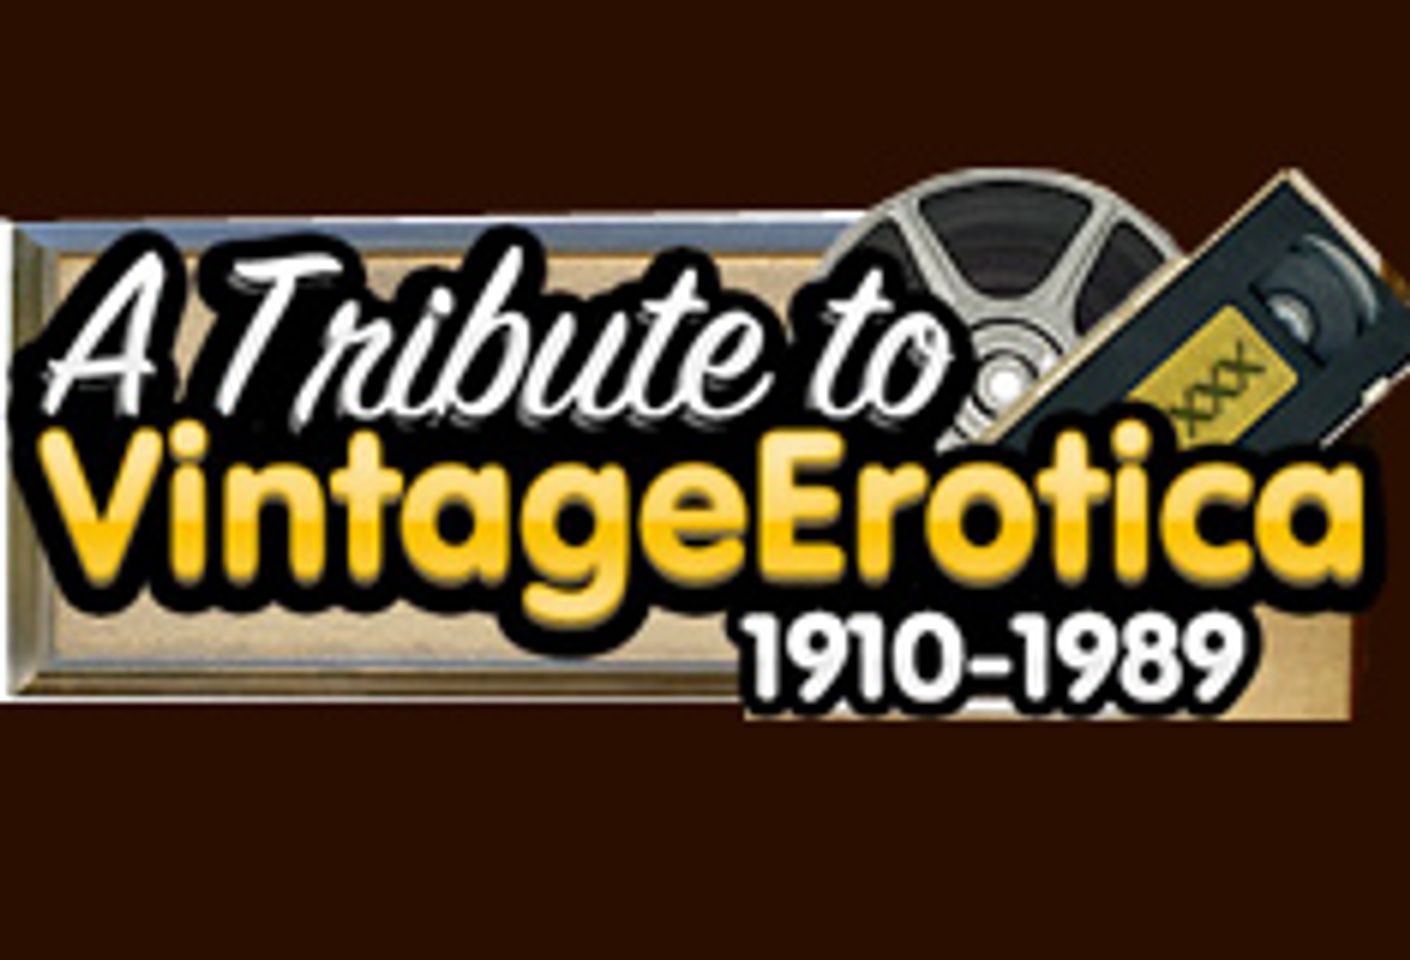 VintageErotica.com Boosts Functionality and Navigation